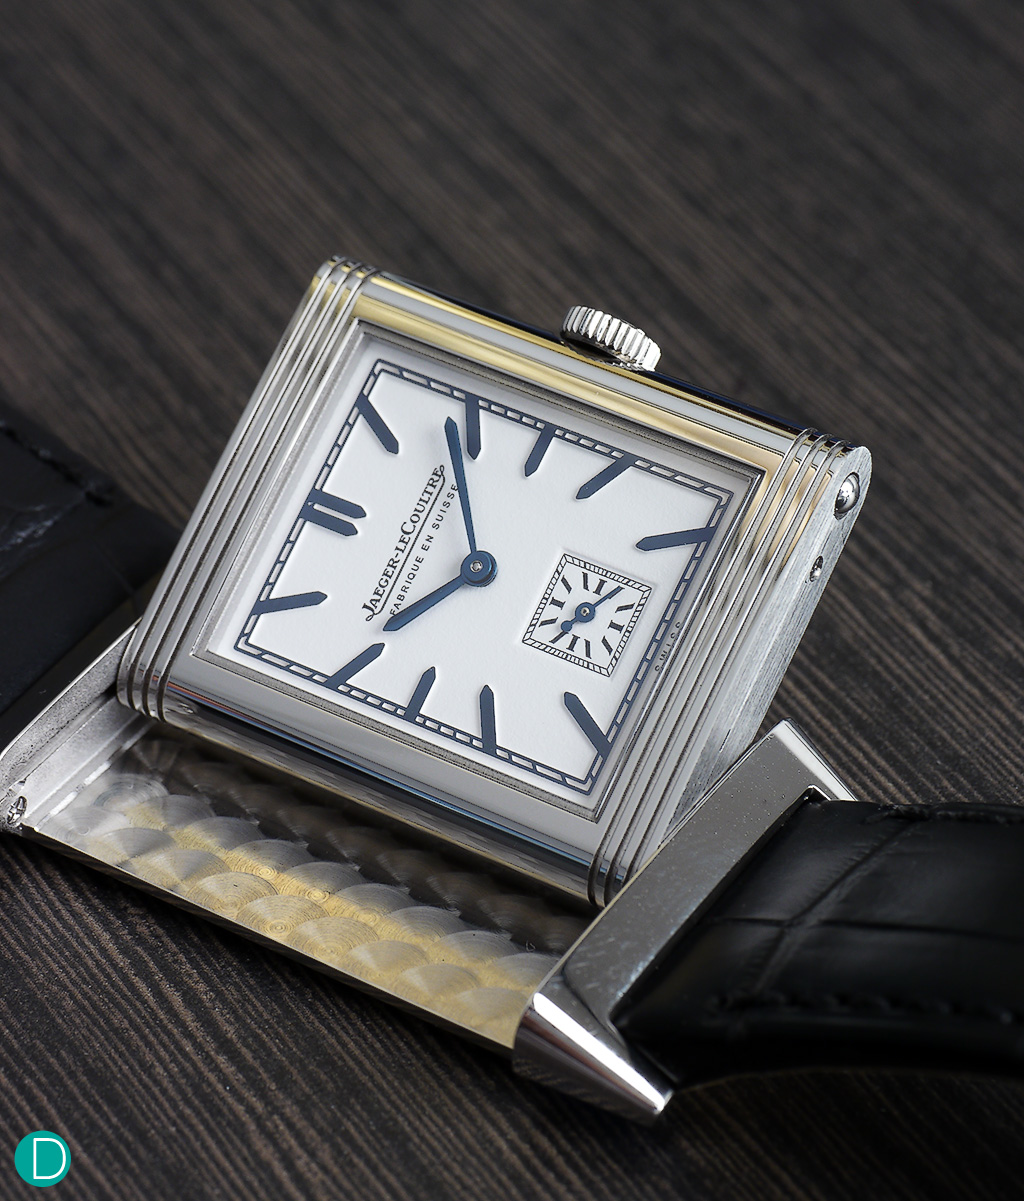 The Jaeger LeCoultre Reverso 1948 Ultra-Thin. 